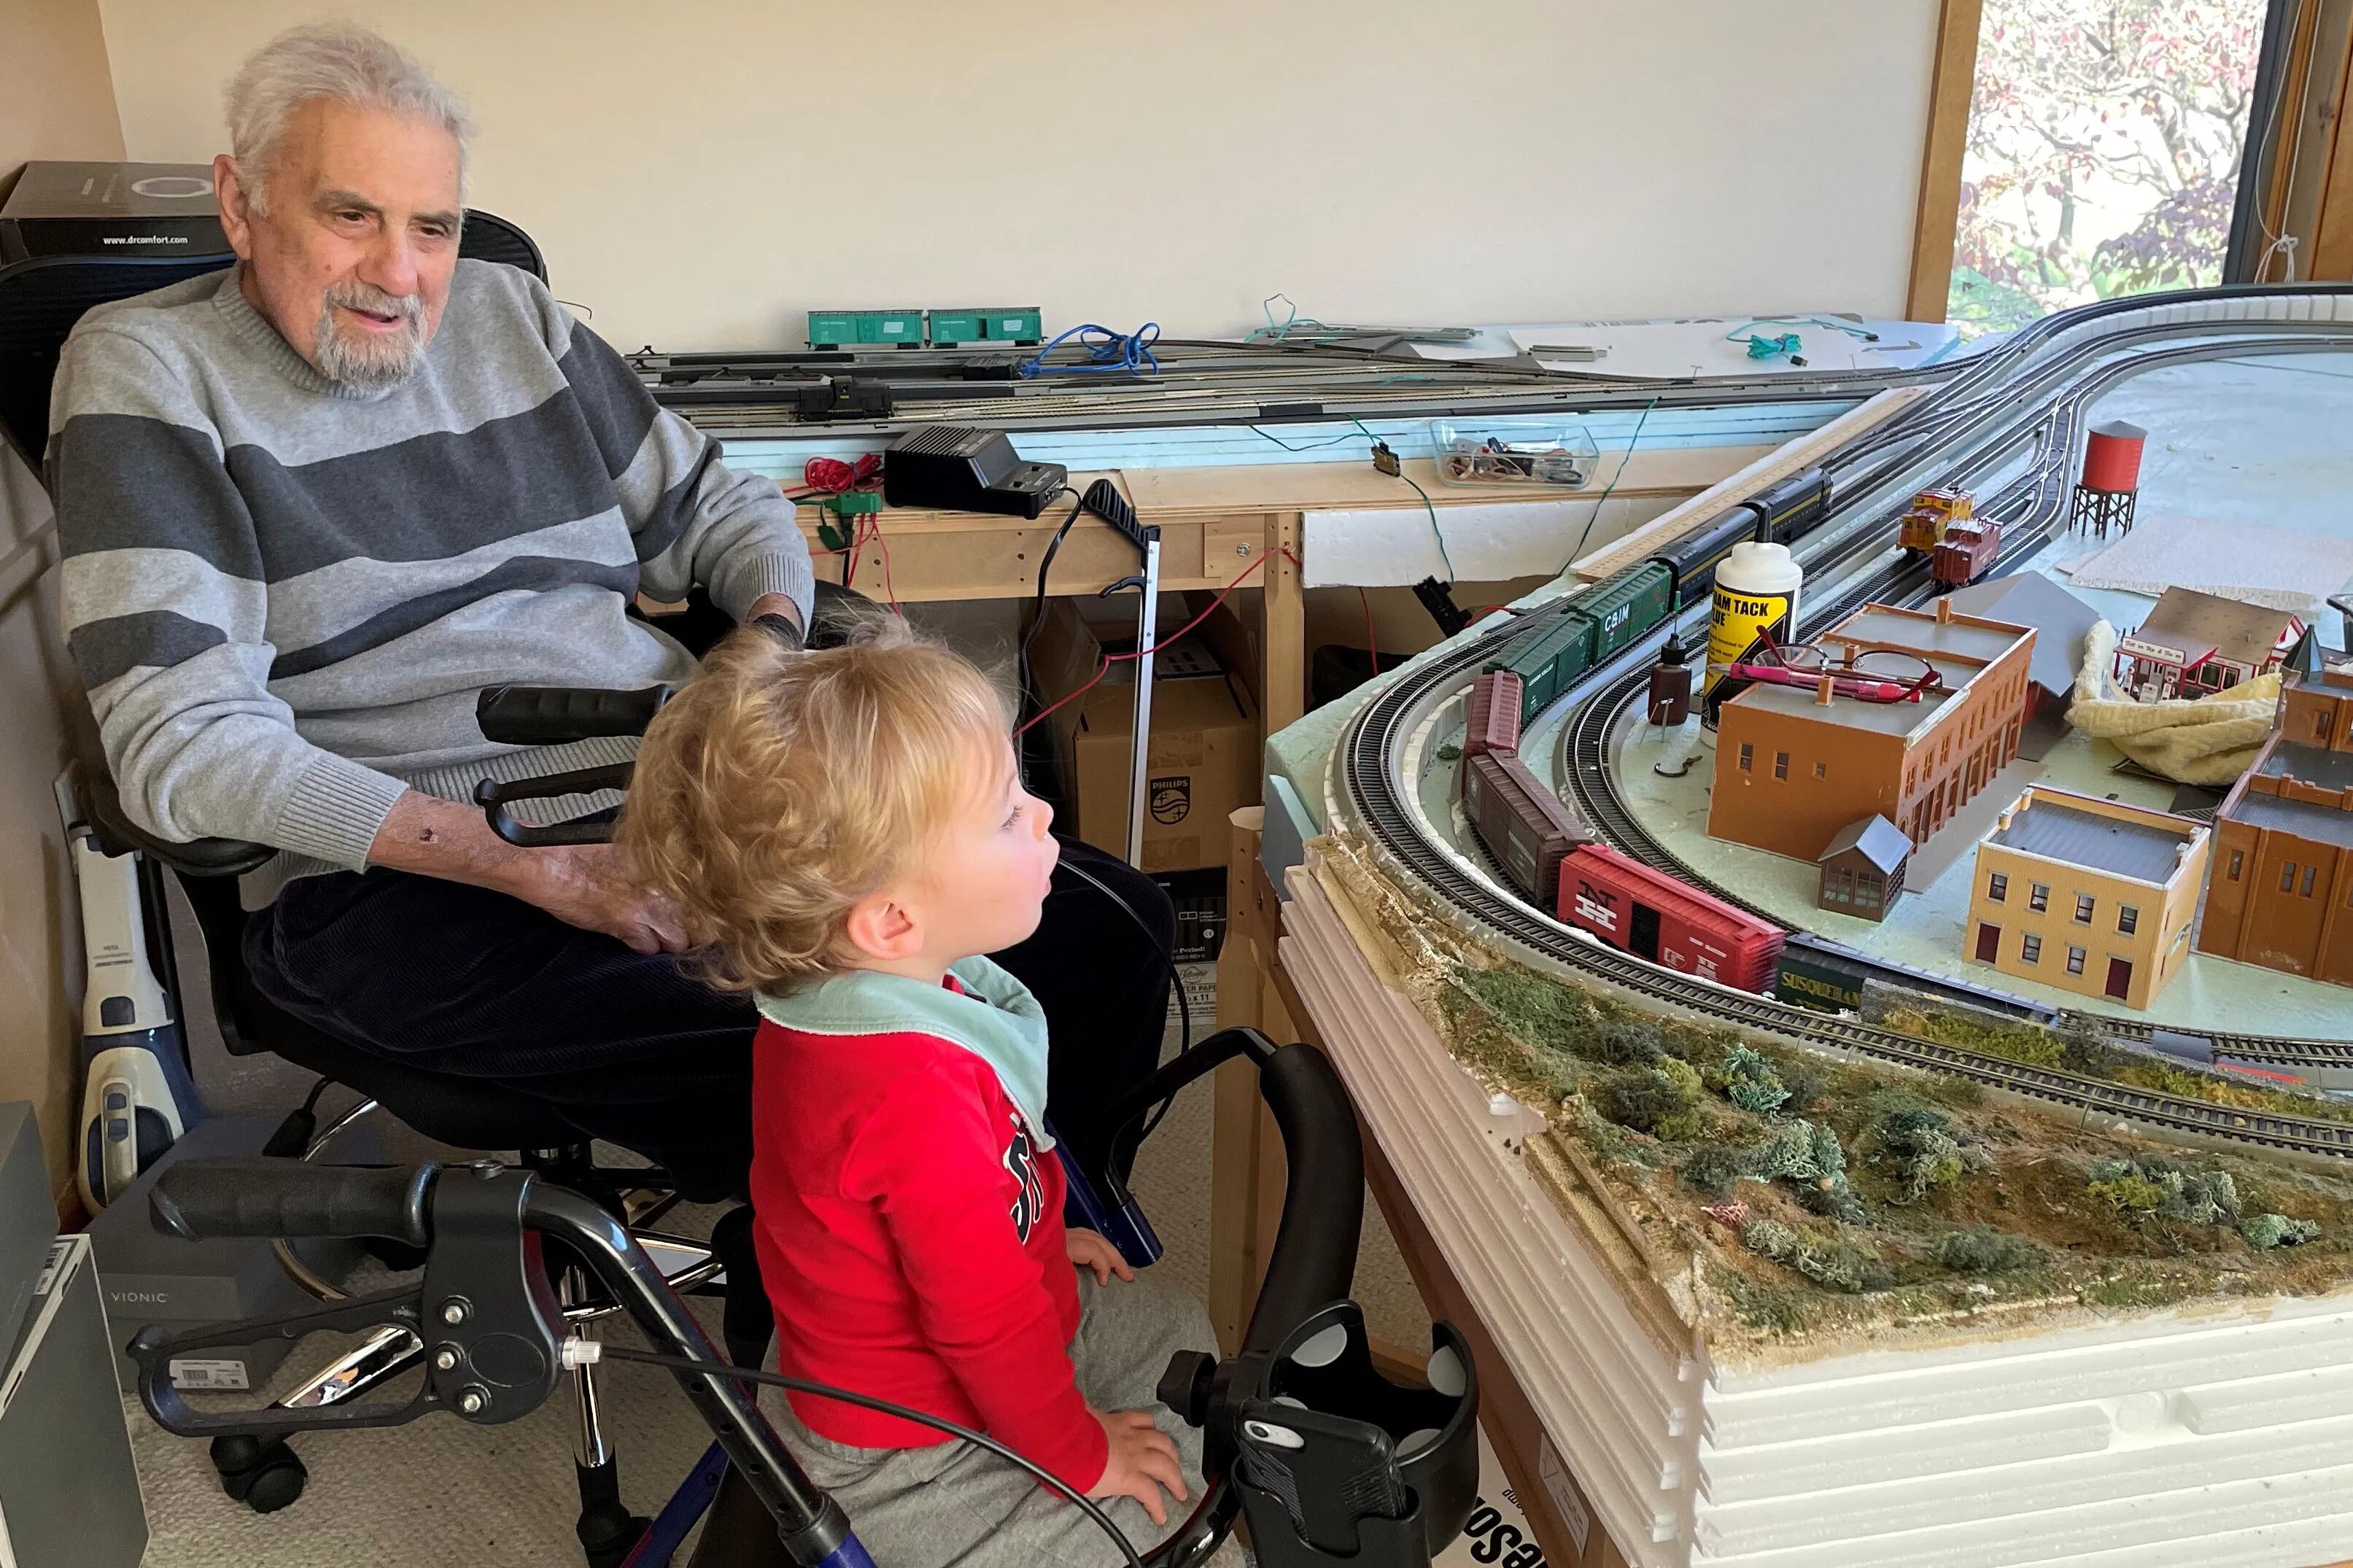 A model train enthusiast, Dr. DeCosmo watches as his great-grandson takes in one of his recent layouts.